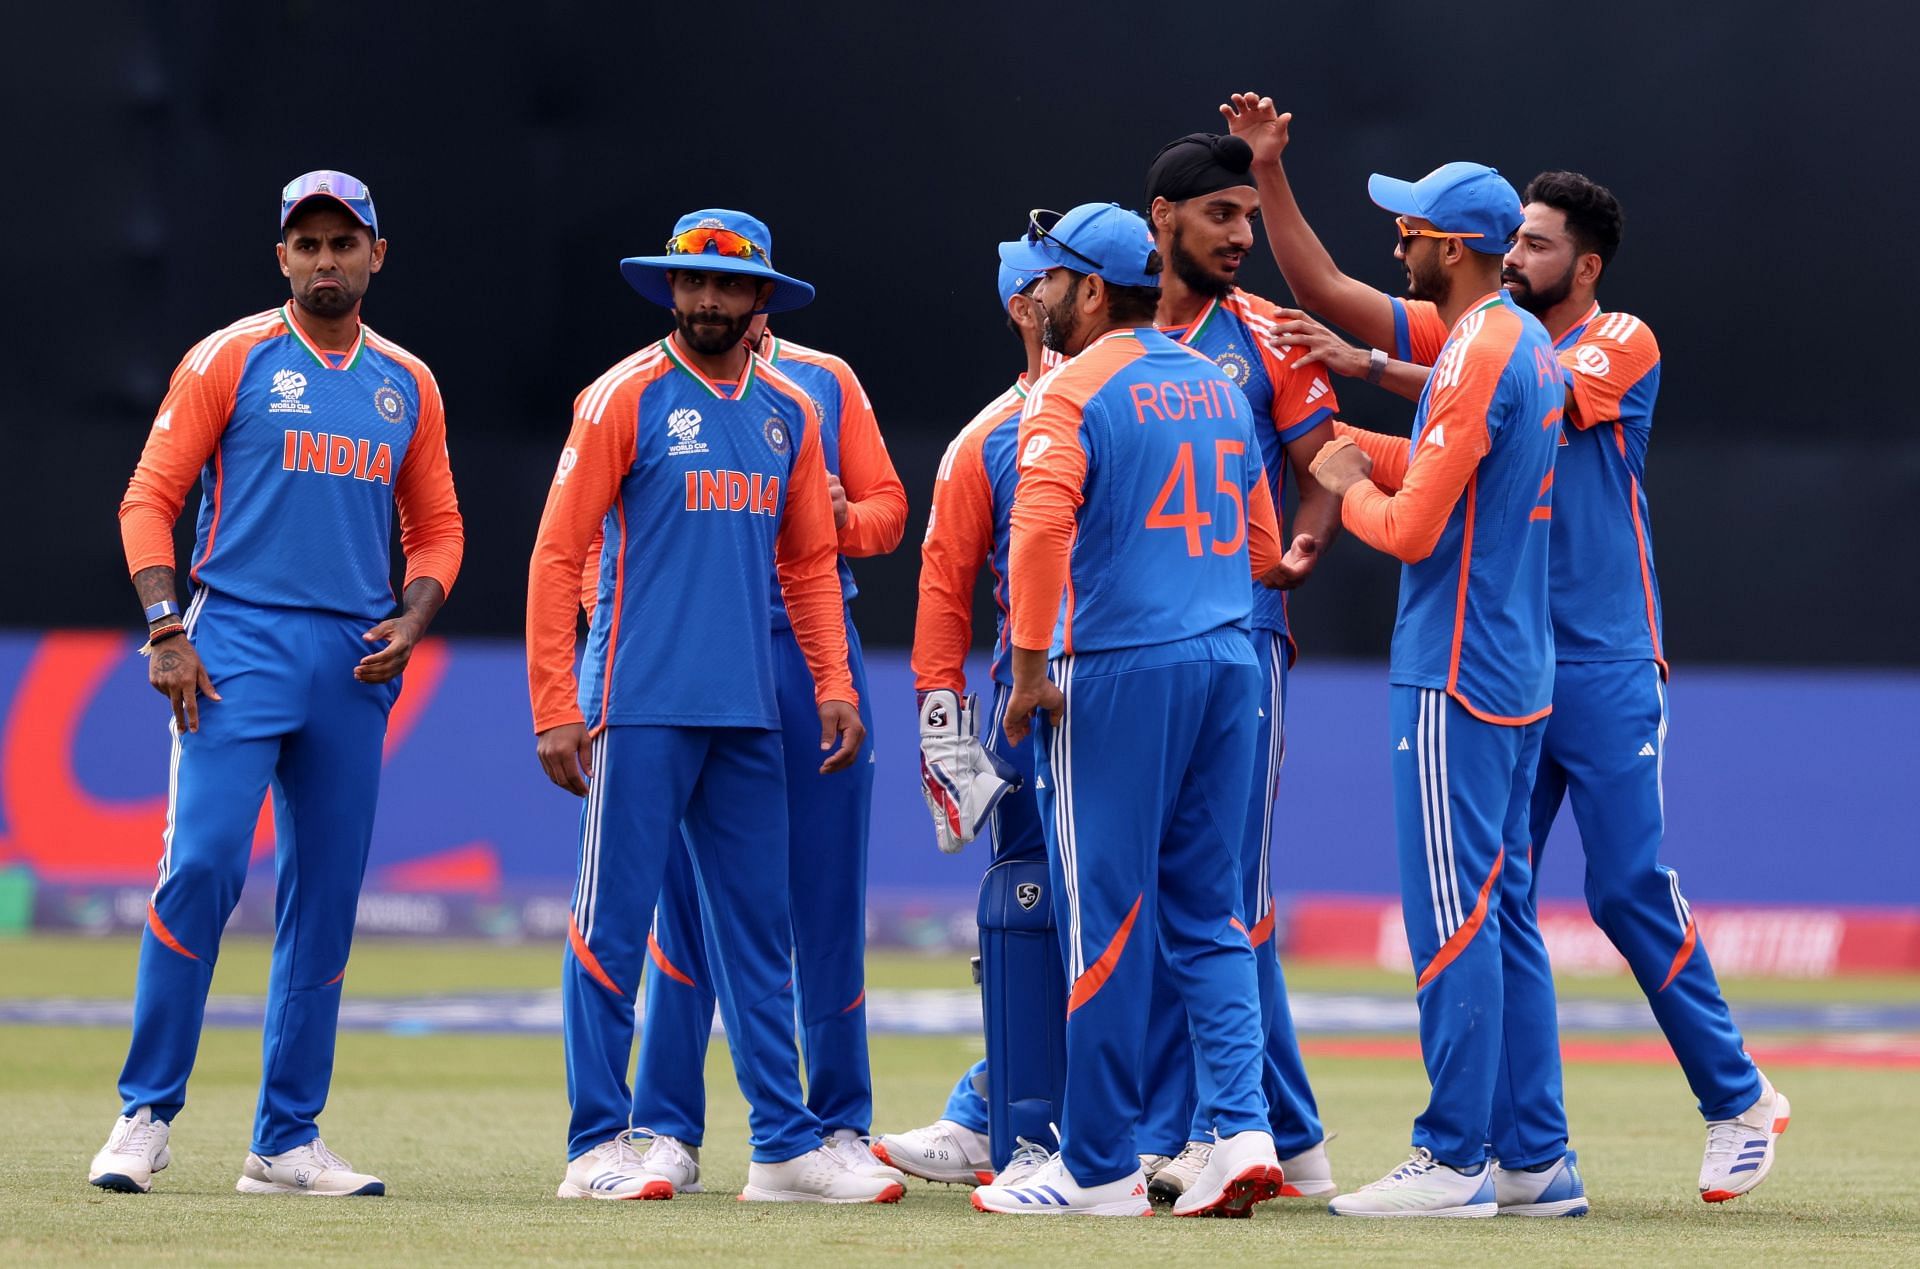 [Watch] Arshdeep Singh's family visits New York to support India during T20 World Cup match against Pakistan